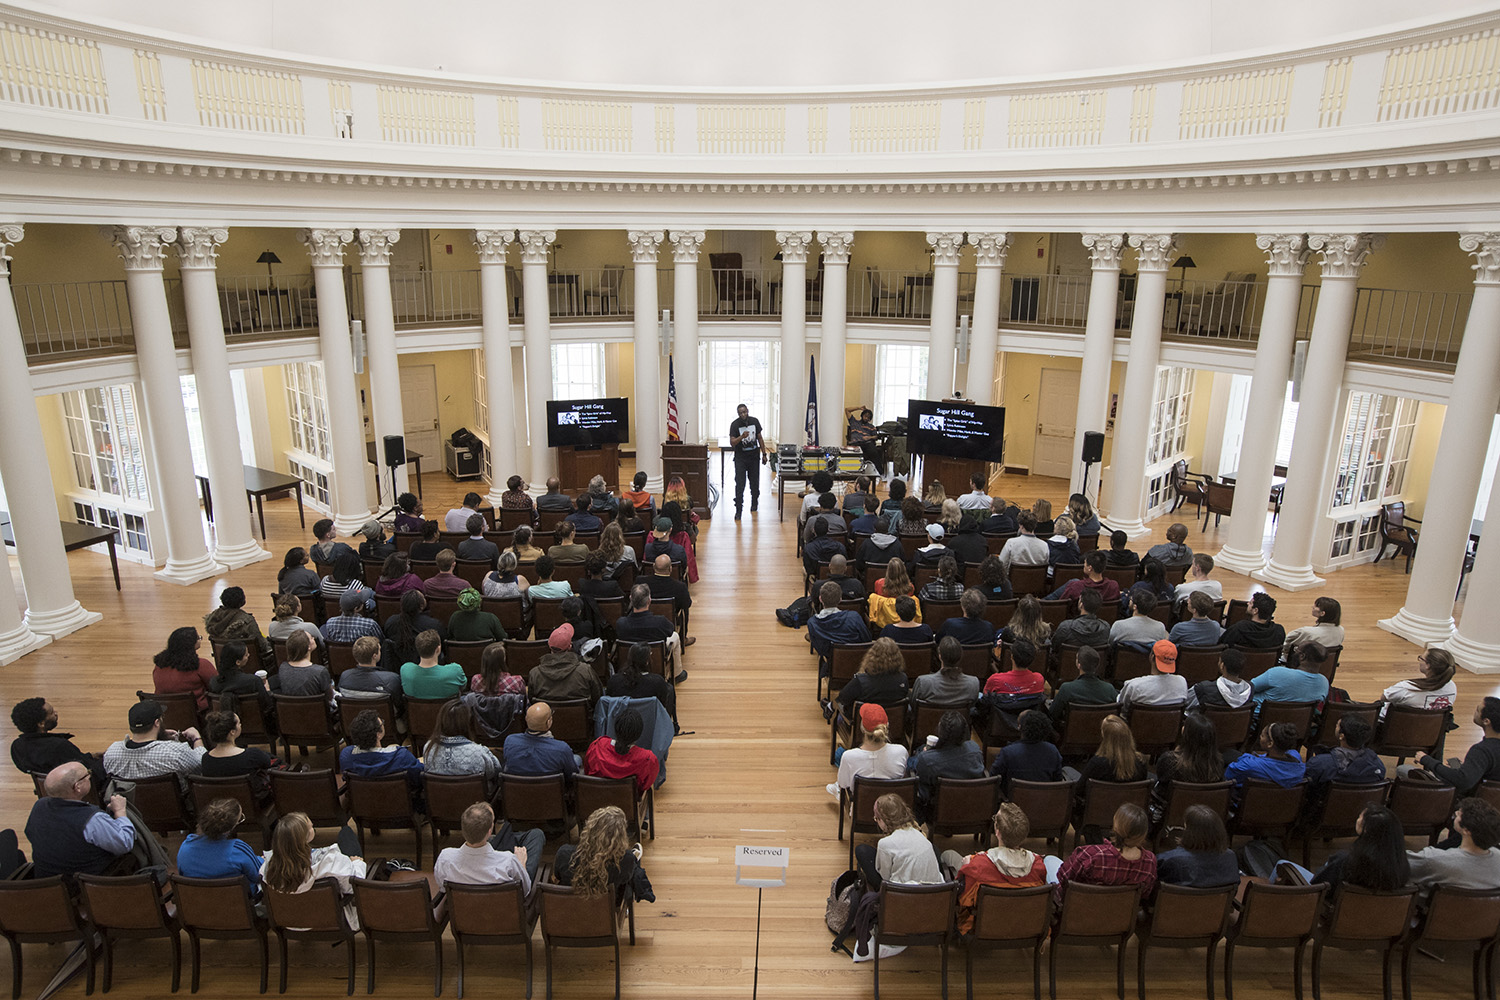 Students, faculty and community members packed the Rotunda's Dome Room for 9th Wonder's talk on the history of hip-hop. (Photo by Dan Addison, University Communications)